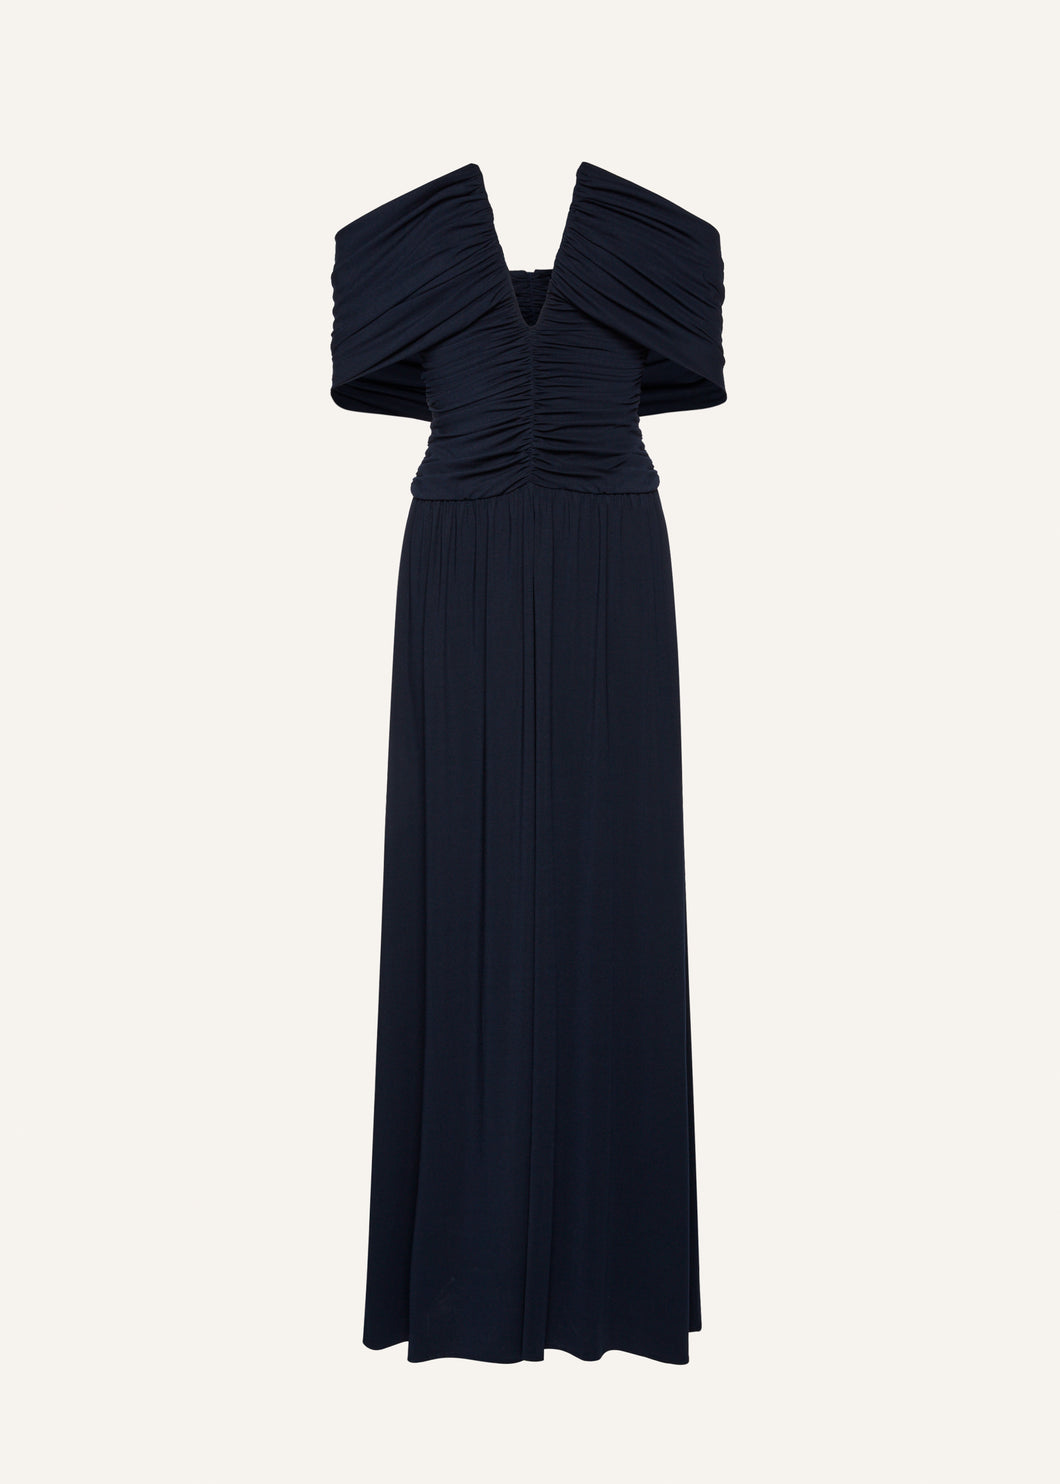 V neck ruched wrap maxi dress in navy